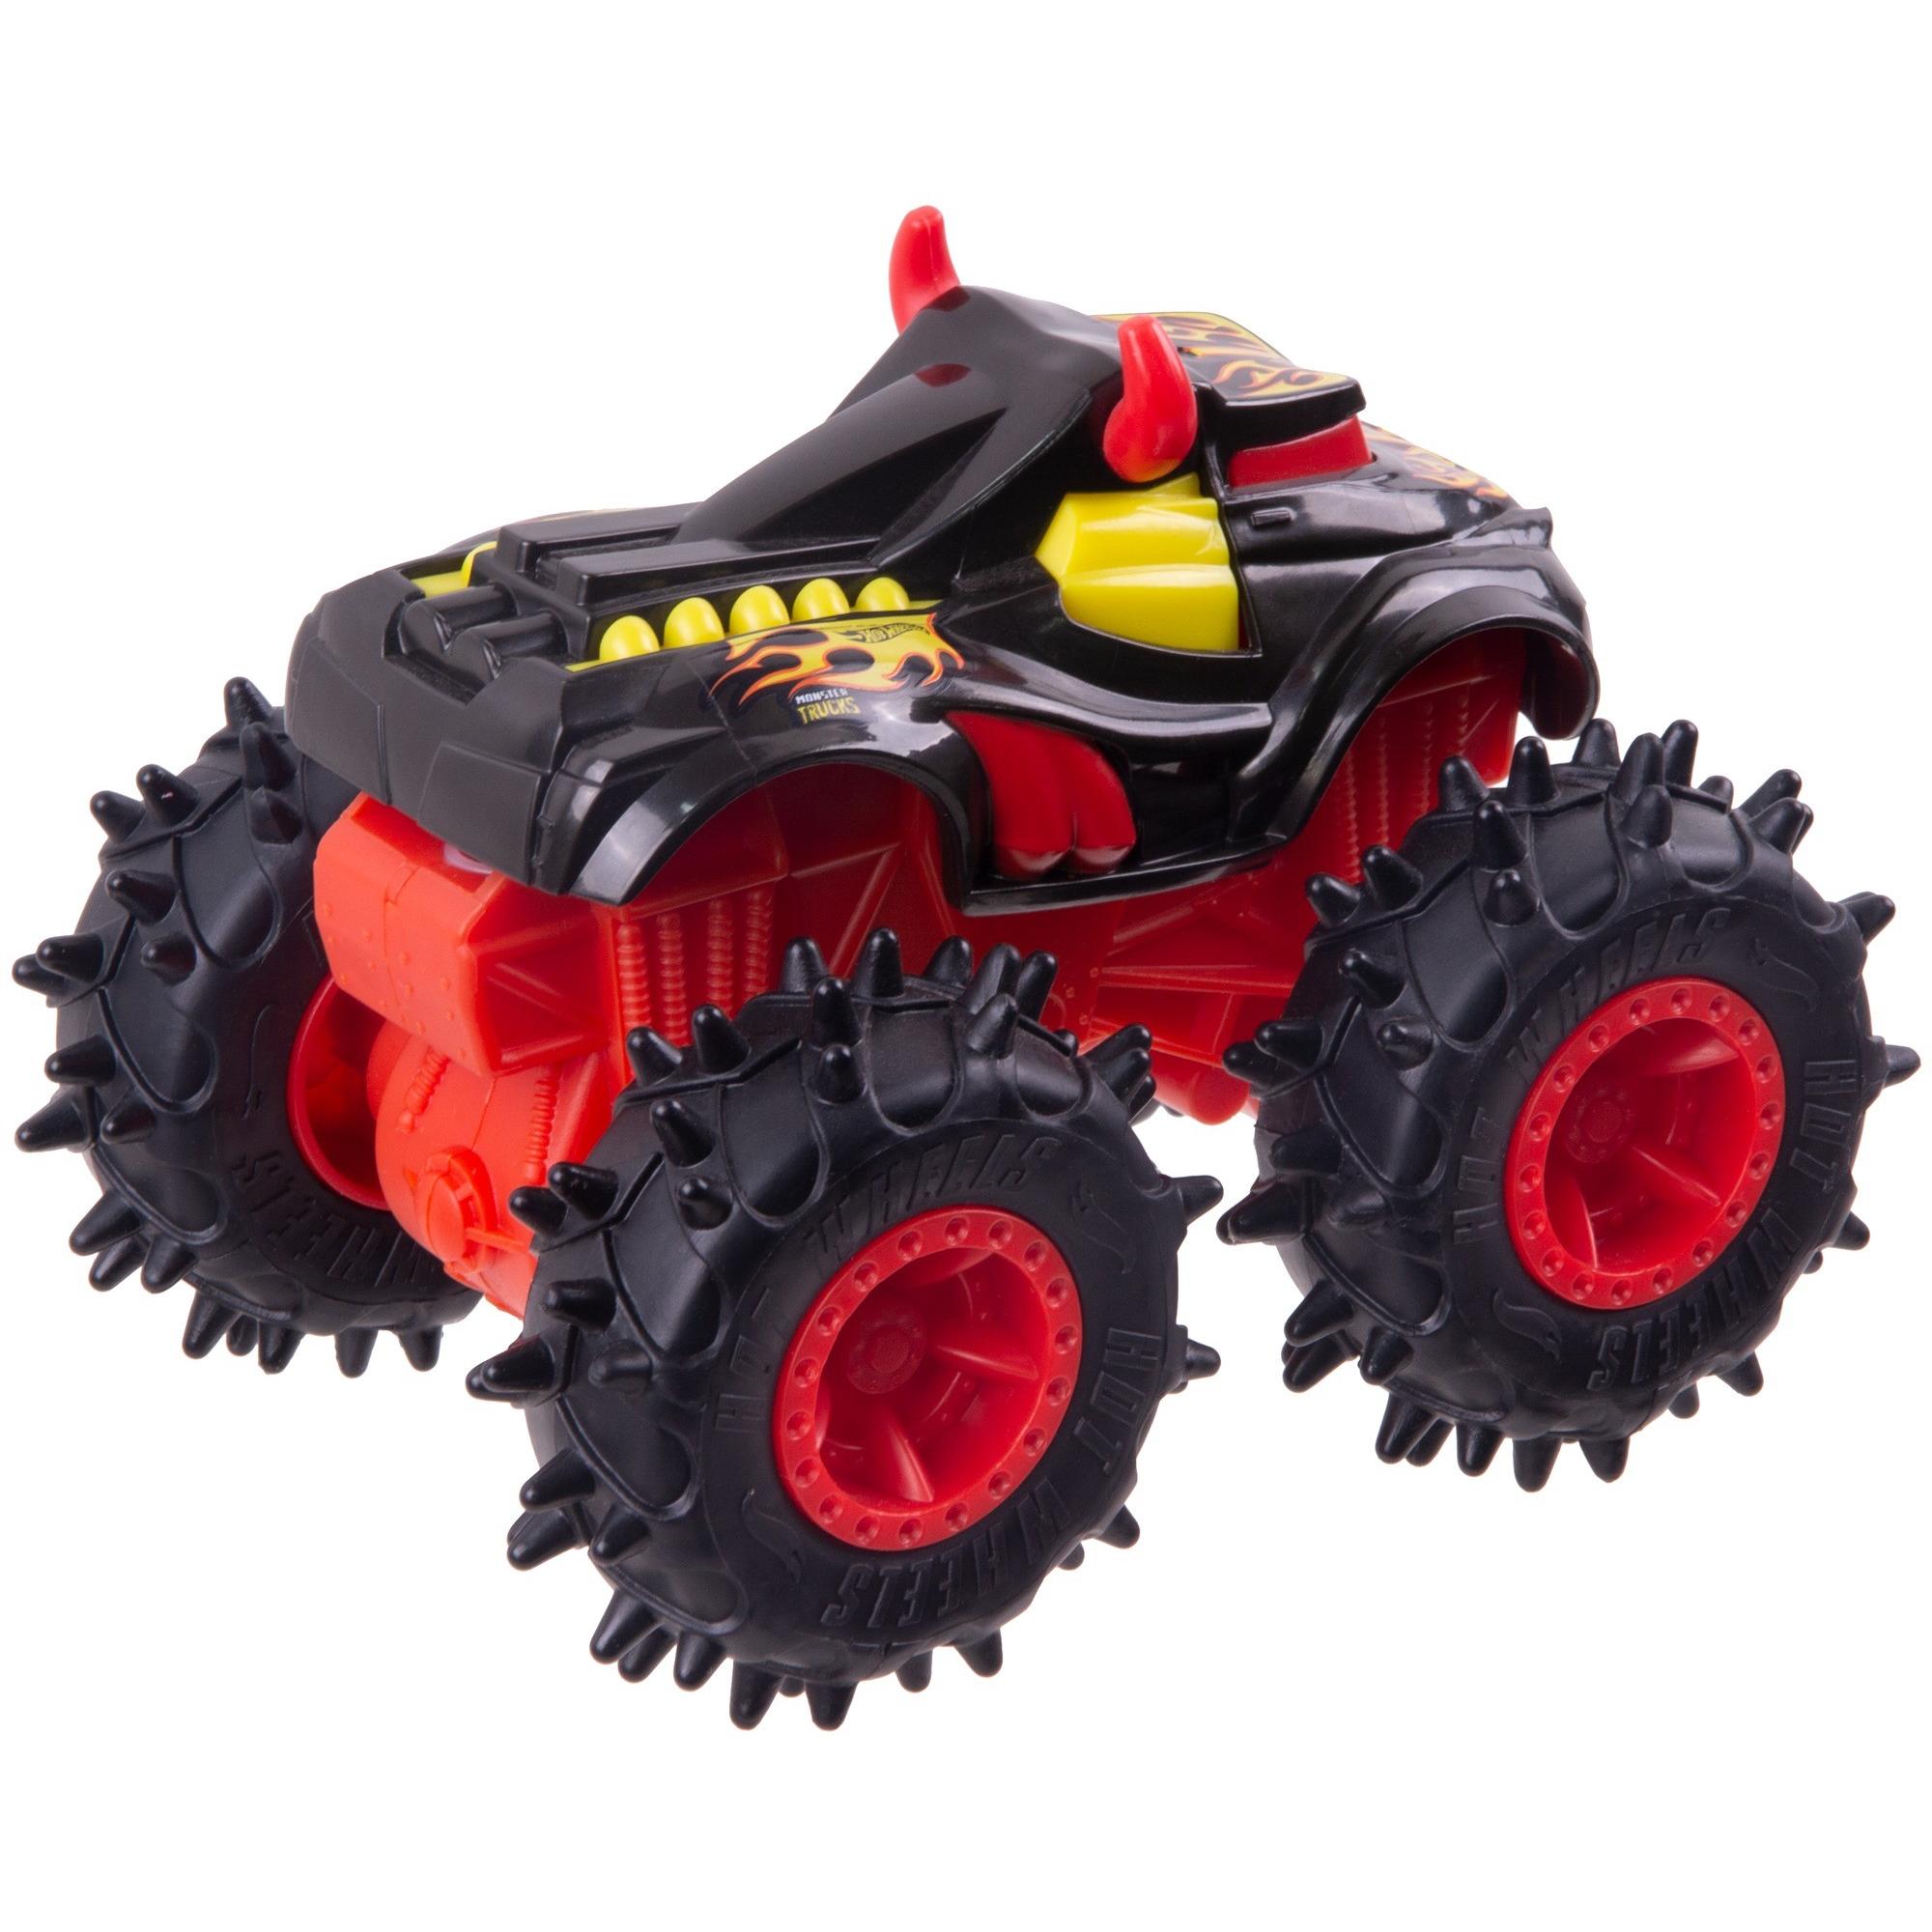 Monster Trucks By Hot Wheels 1:43 Scale Vehicle (Styles May Vary) - image 2 of 9